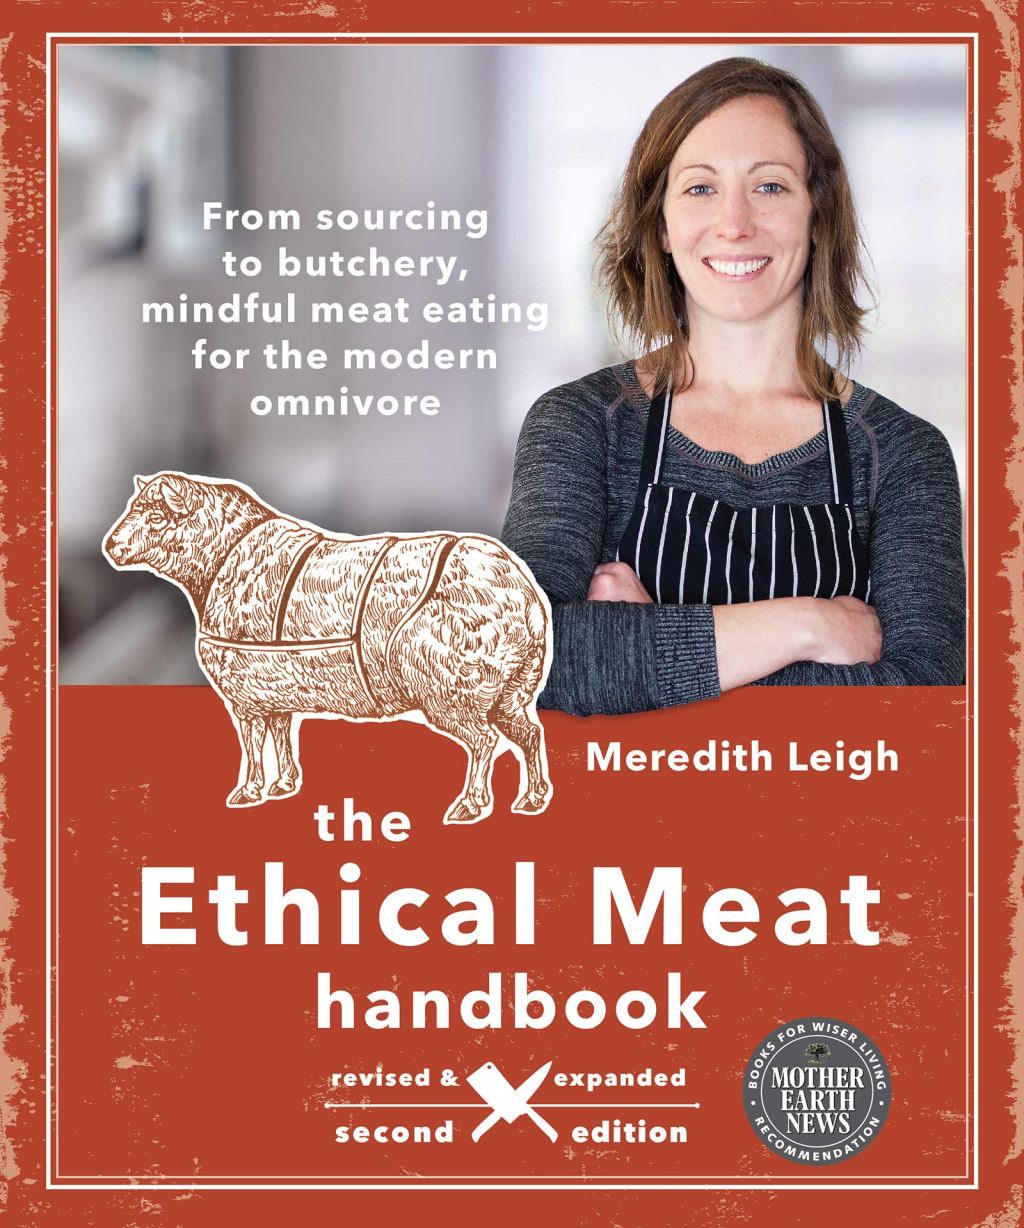 Making Ethical Meat Choices: Prioritizing Animal Welfare and the Environment